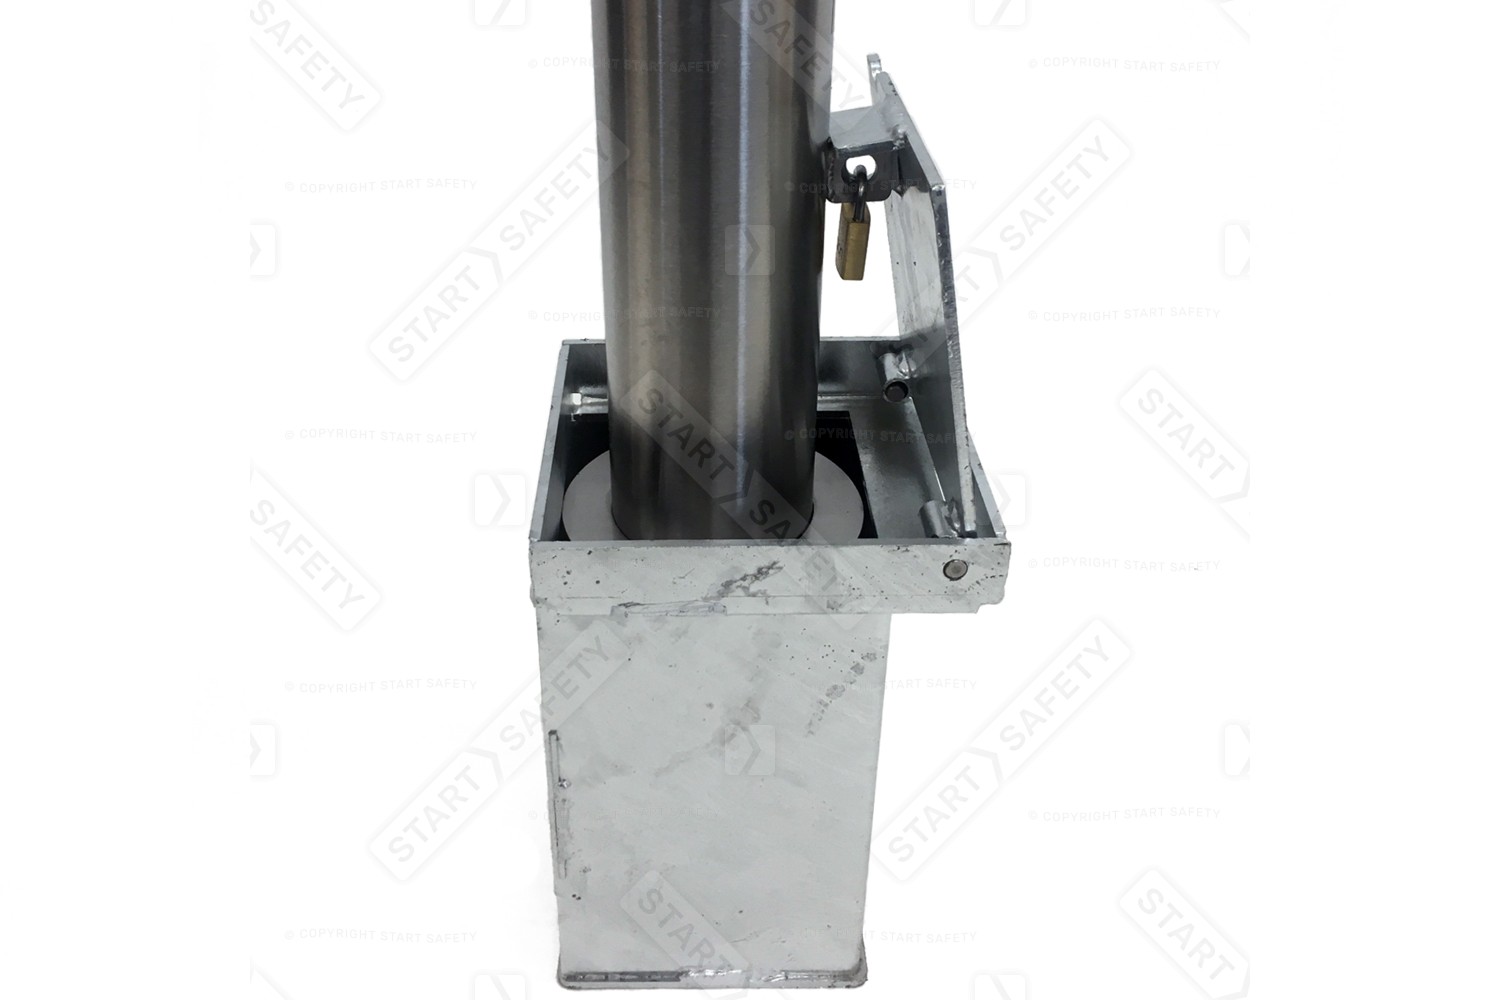 Foot Details of stainless removable bollard